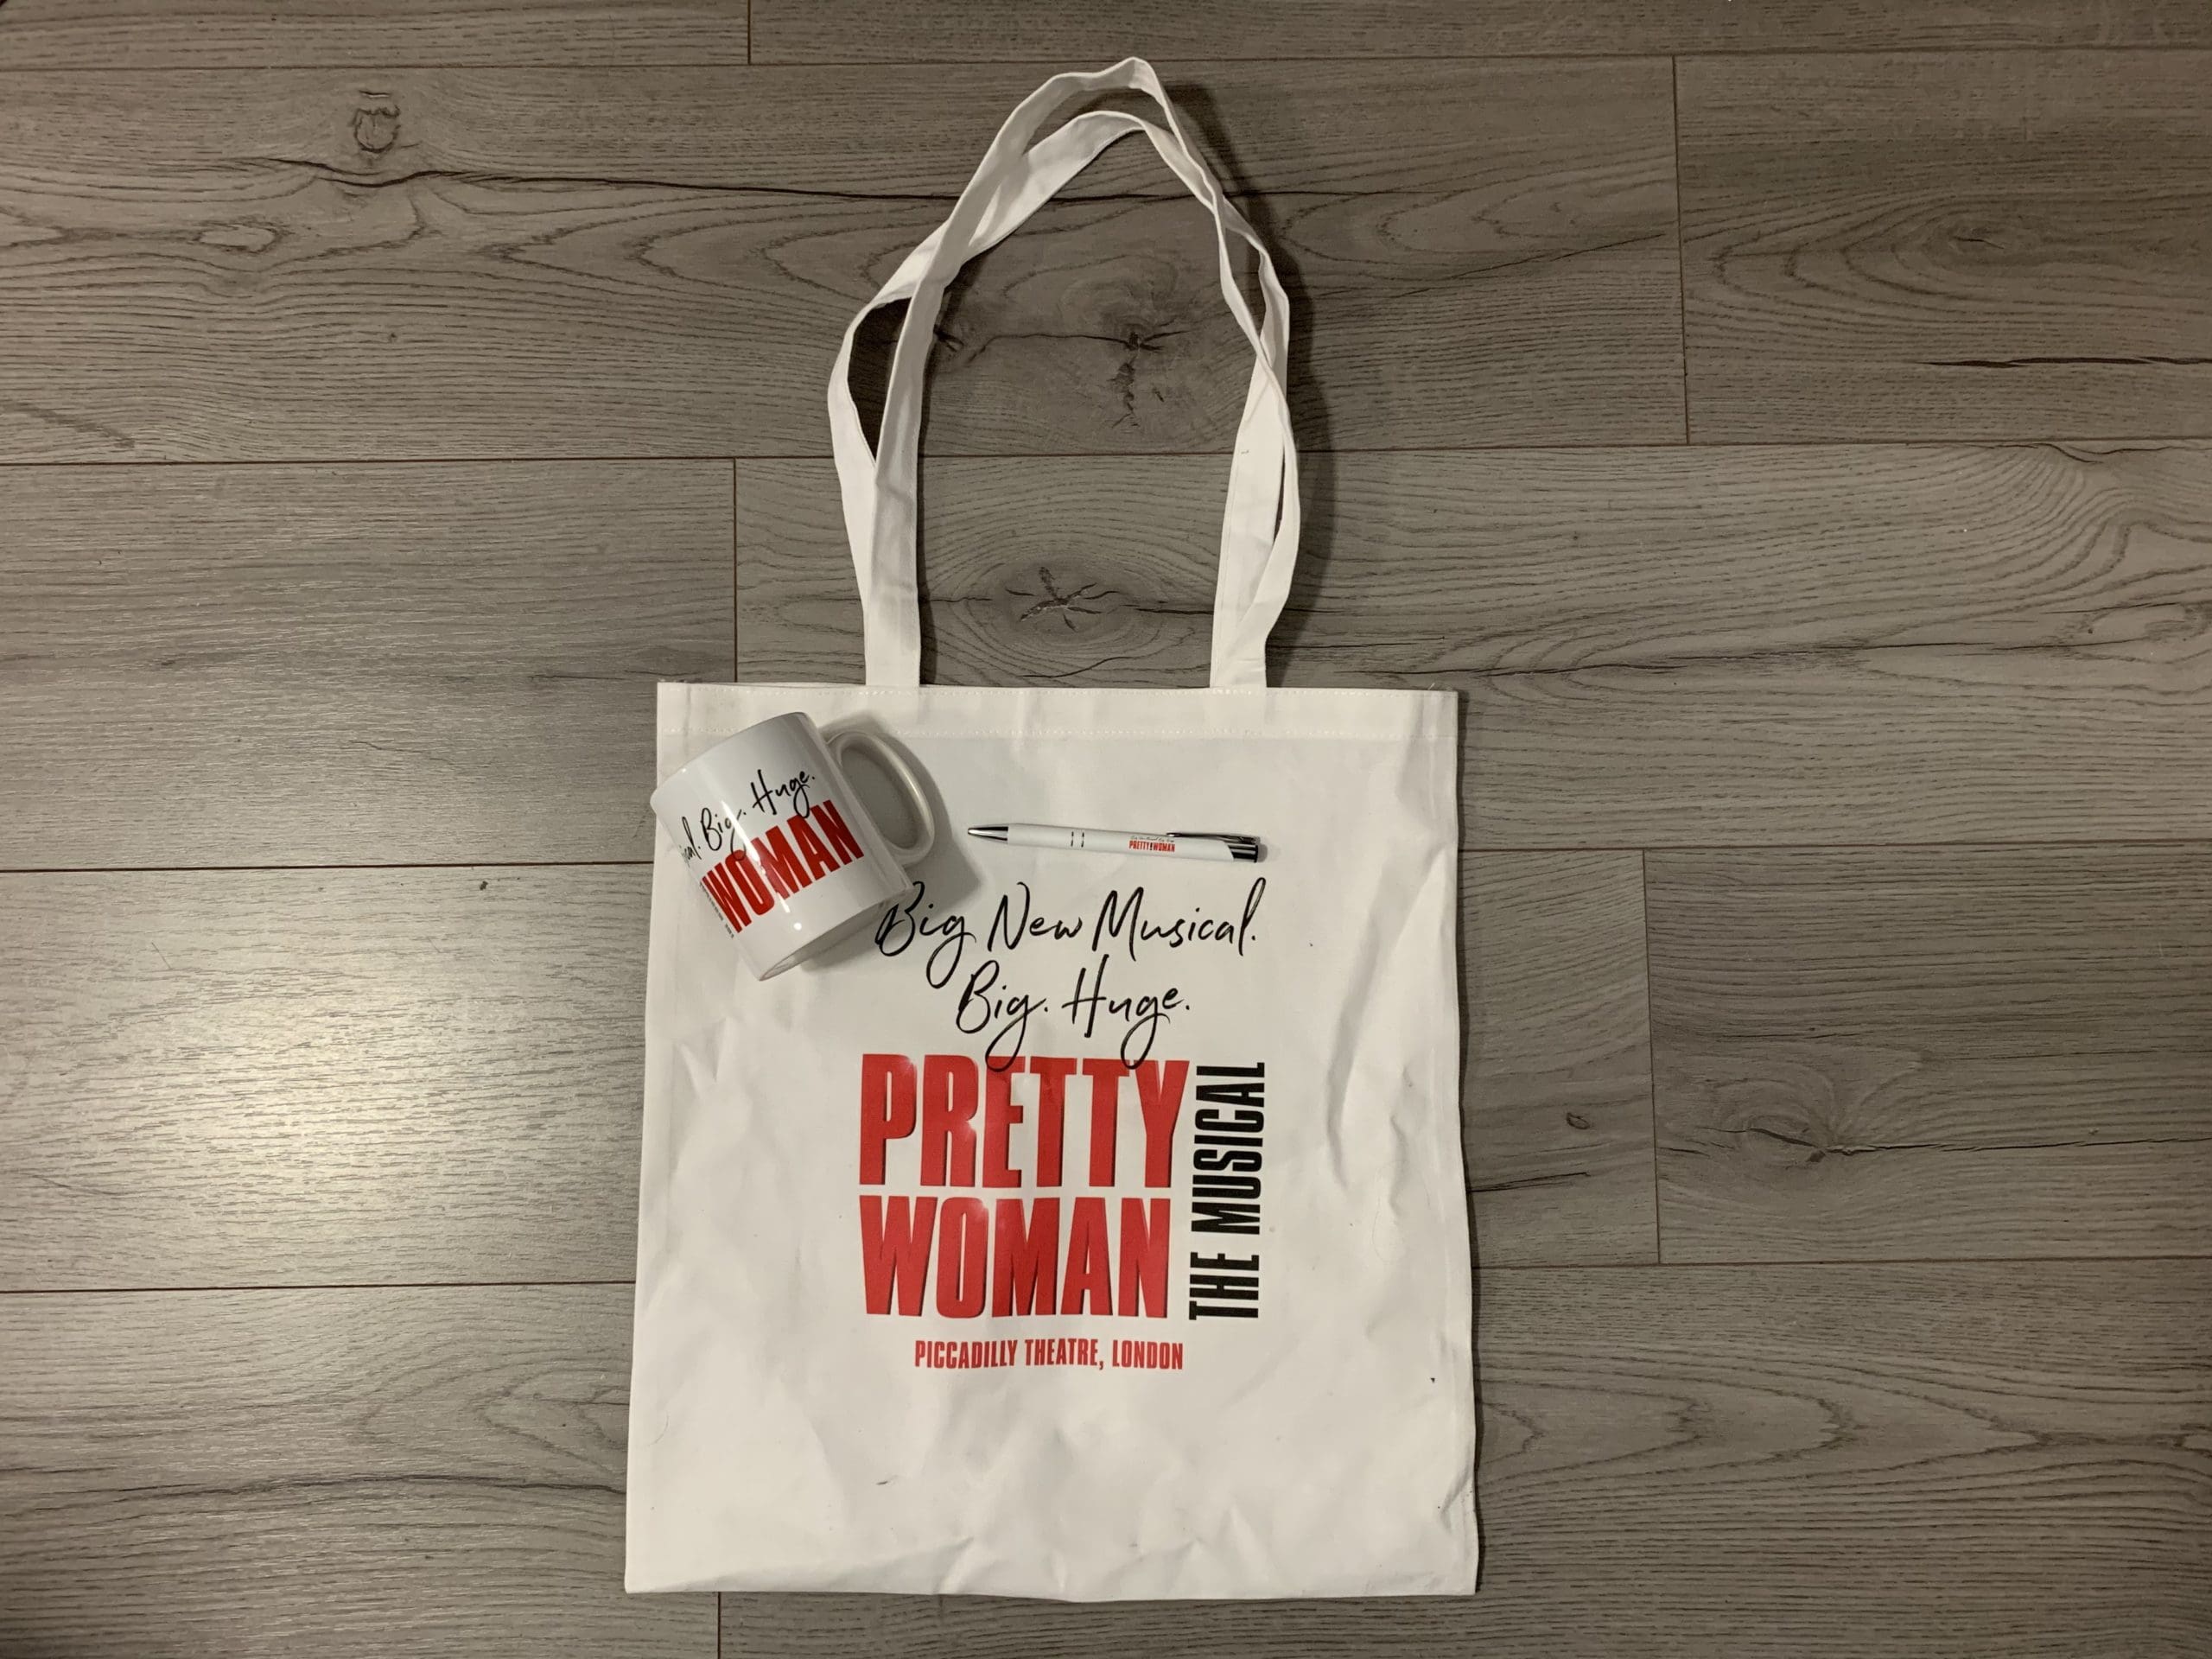 Featured image for “Enter our competition for a chance to win a Pretty Woman tote bag, mug and pen”